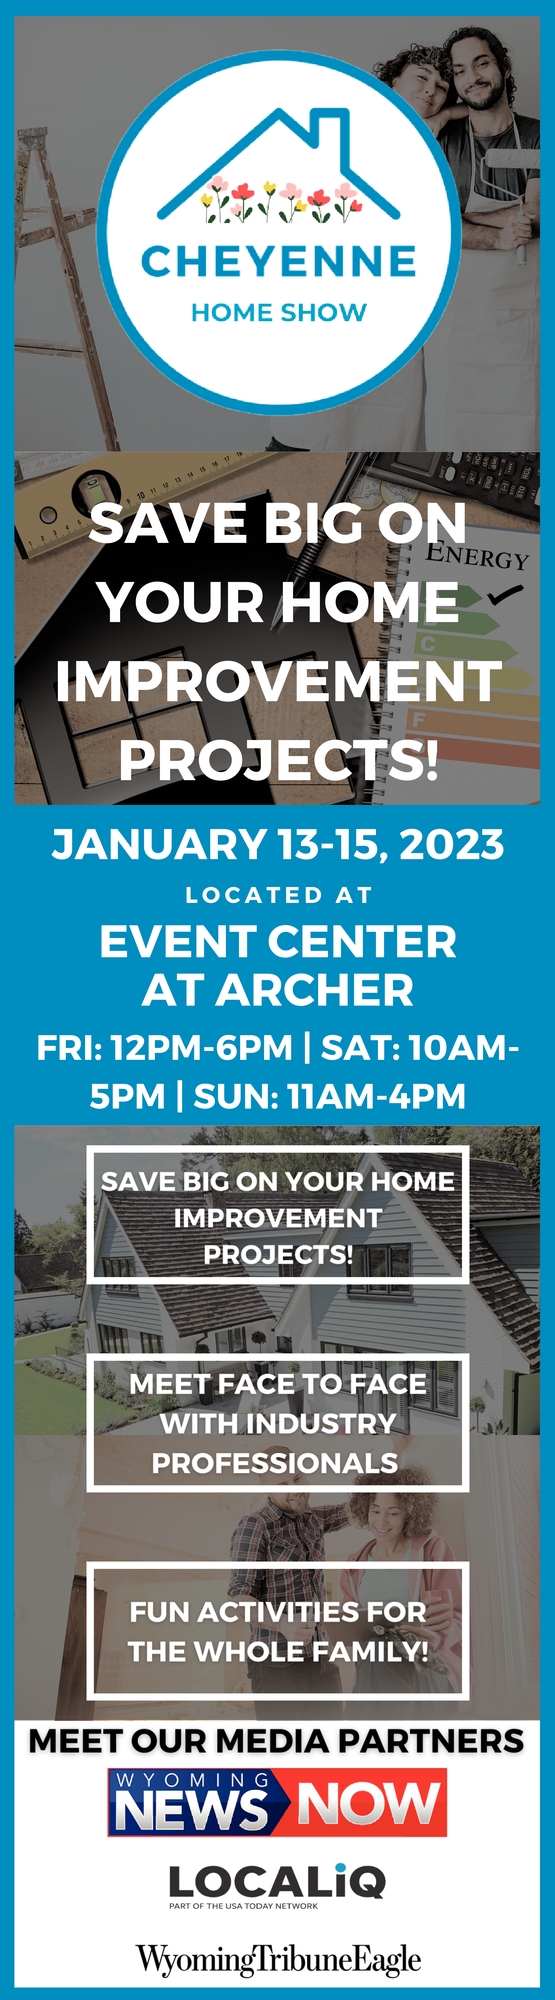 Save Big On Your Home Improvement Projects!